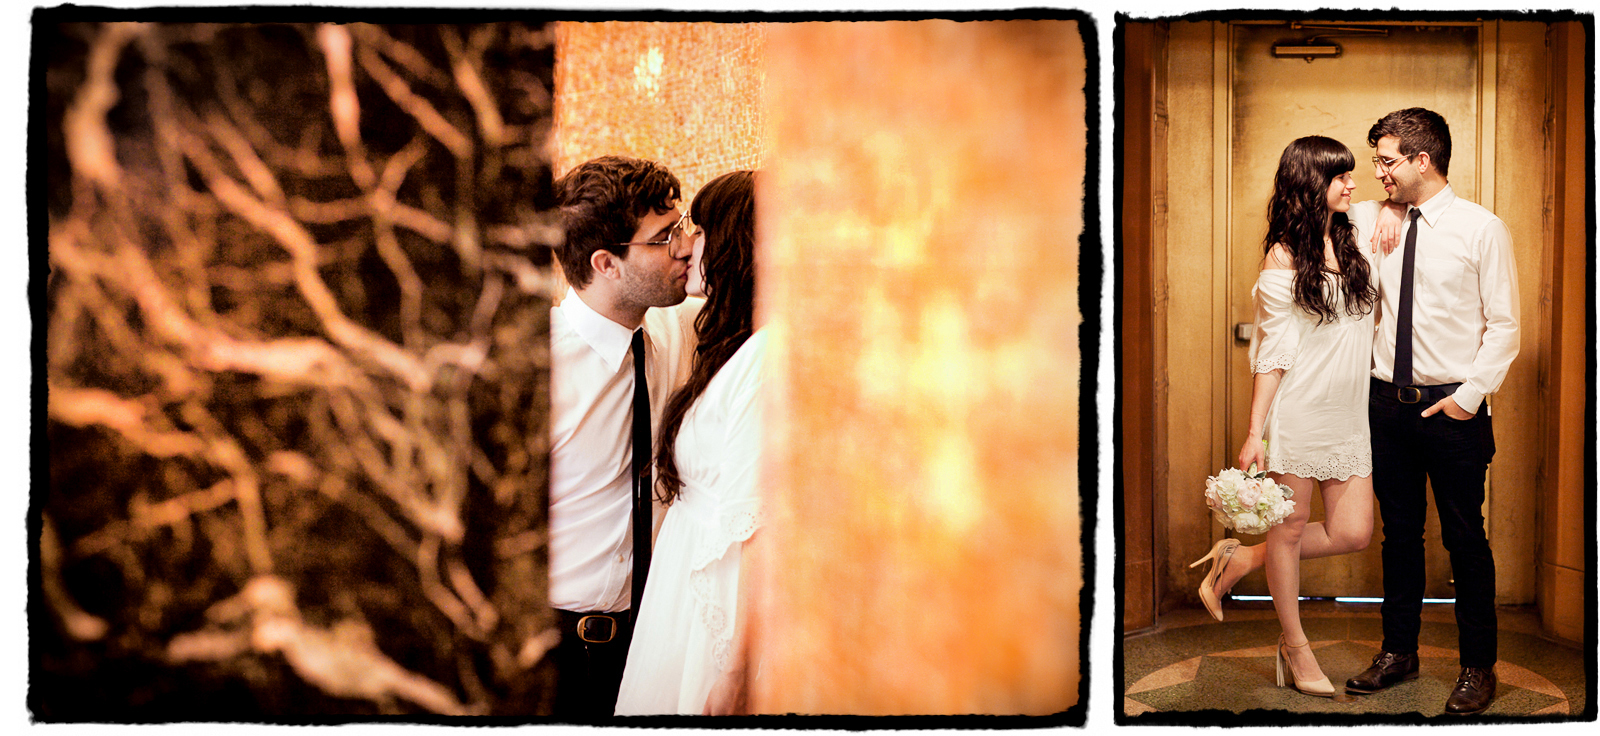 Mookie and Lisa were married at City Hall in NYC with a few friends and family in attendance.  I just had to make these portraits of them with the marble and tile of the city clerk's office.  I loved this revolving door too.